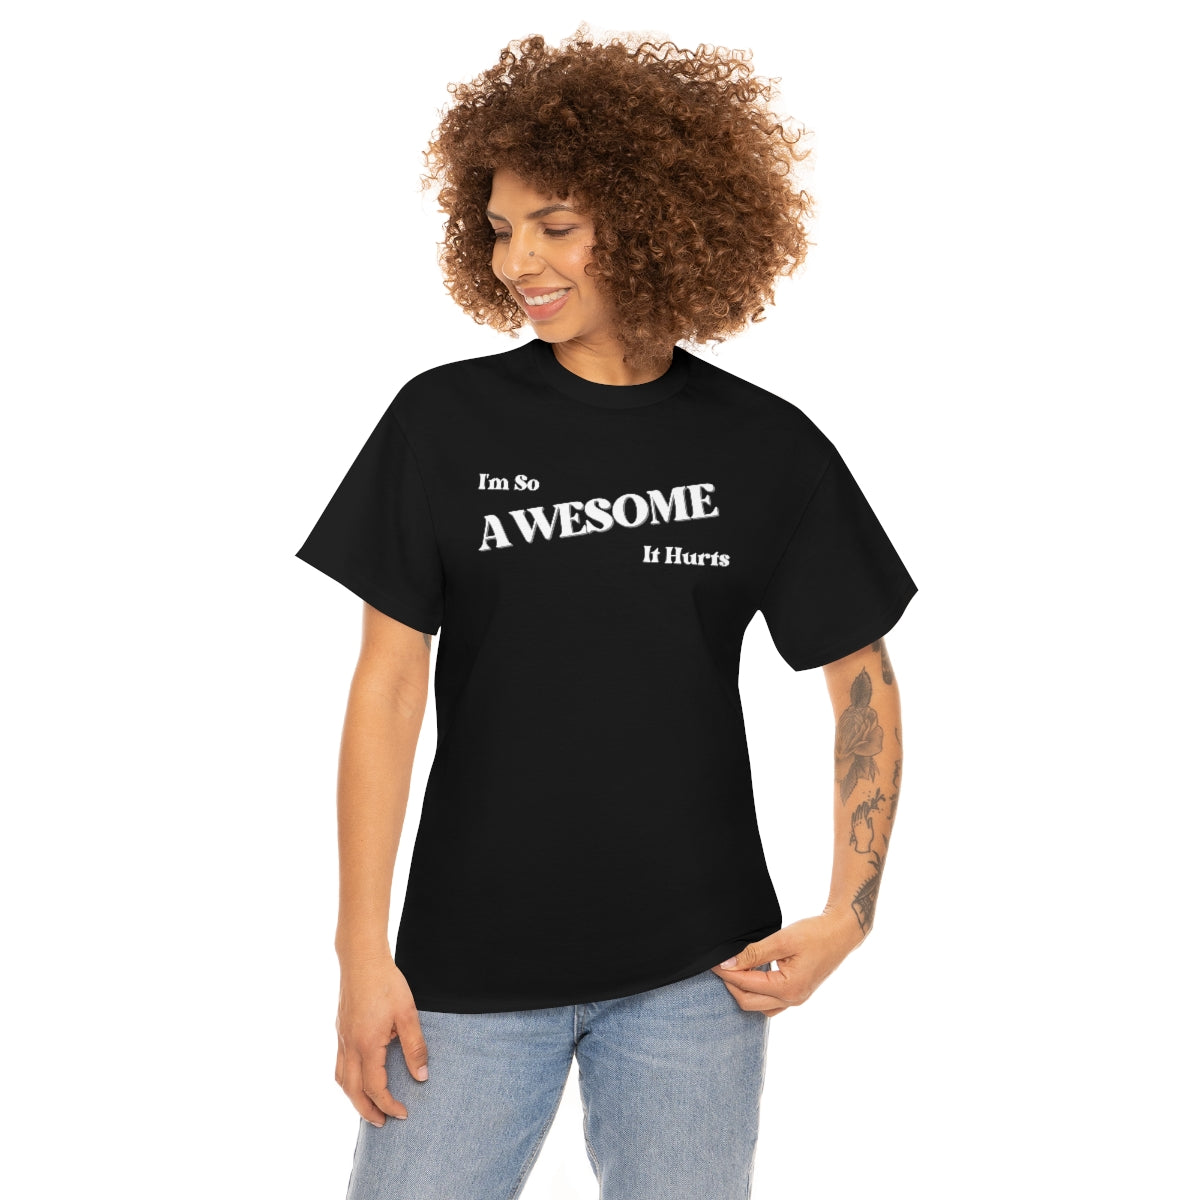 I'm So AWESOME It Hurts Tee